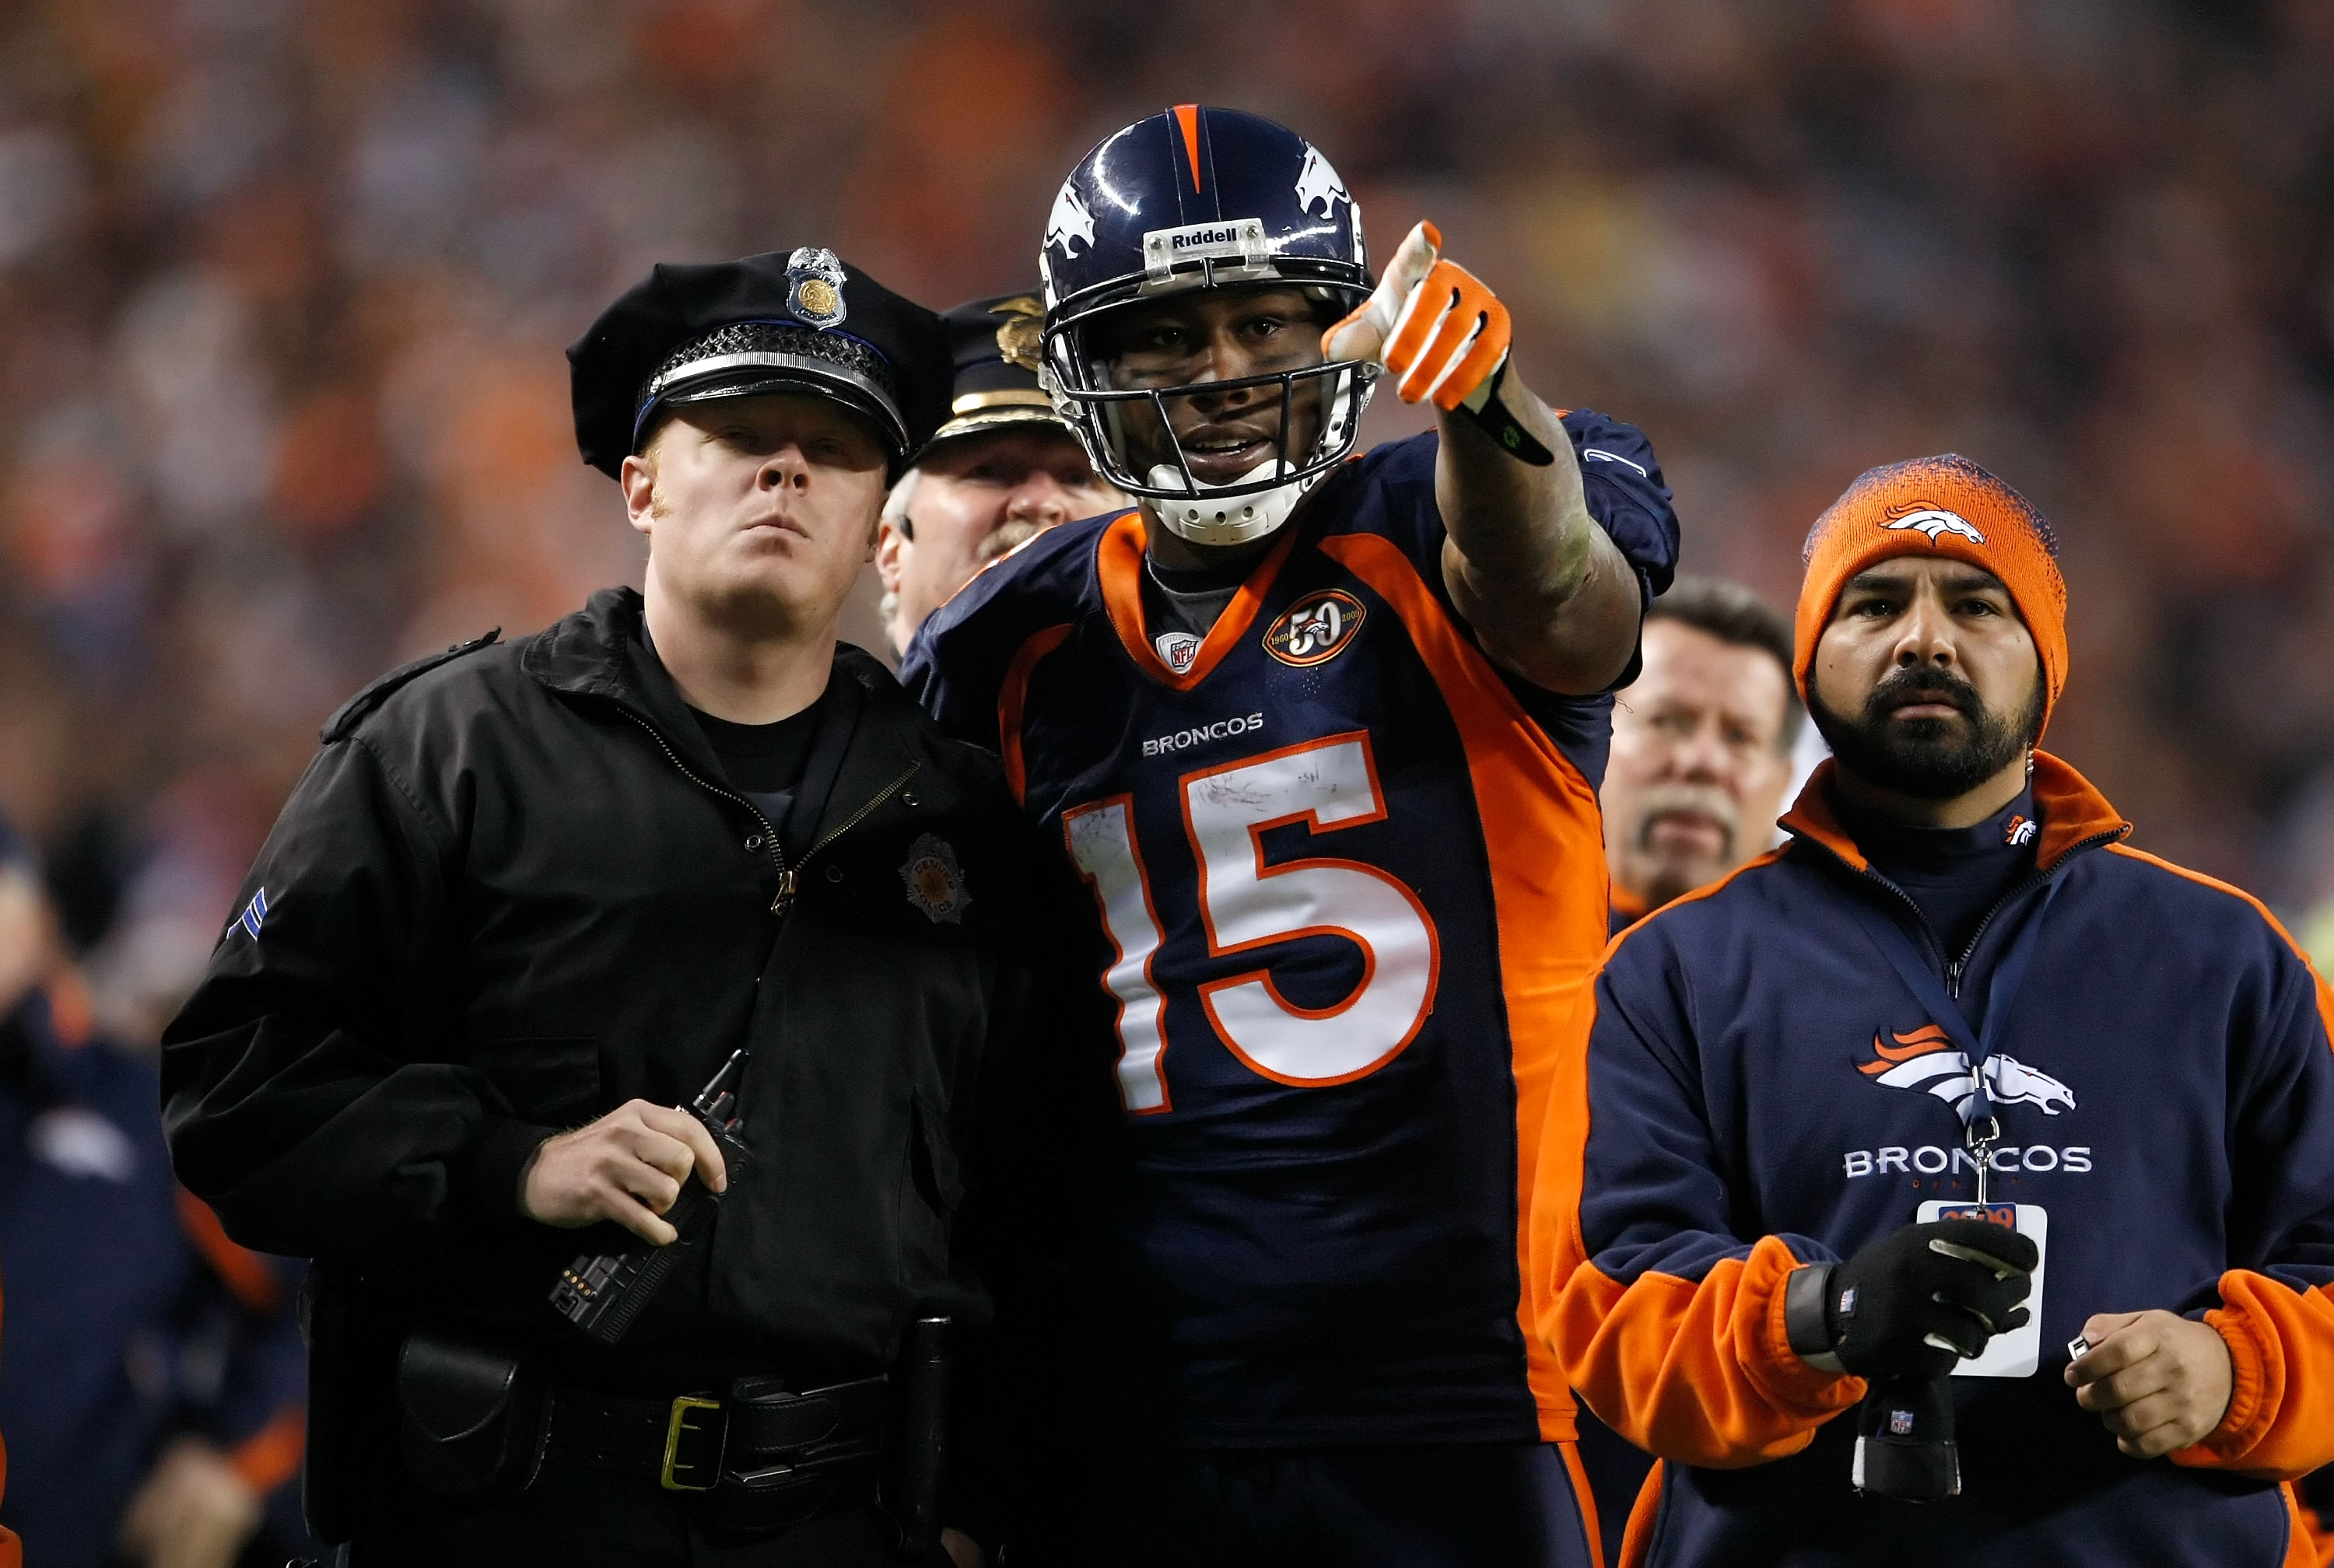 DENVER - DECEMBER 20:  Brandon Marshall #15 of the Denver Broncos points out a disturbance in the crowd to a police officer in the second half against the Oakland Raiders at Invesco Field at Mile High on December 20, 2009 in Denver, Colorado. The Raiders